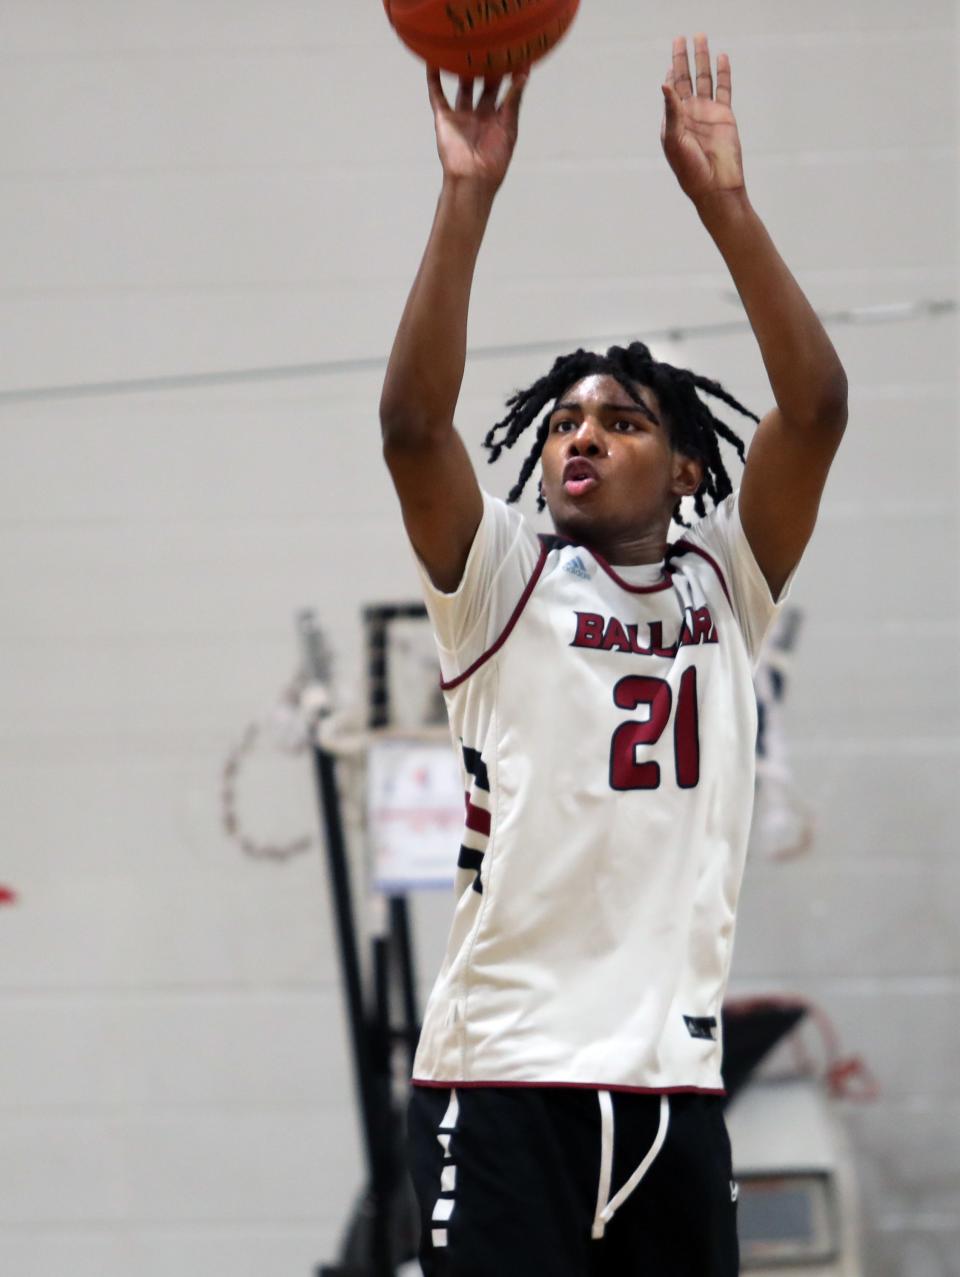 Ballard Bruin’s senior guard Gabe Sisk was supposed to be playing  for a top prep school this season but transferred back to Ballard at the start of the season,Dec. 8, 2022